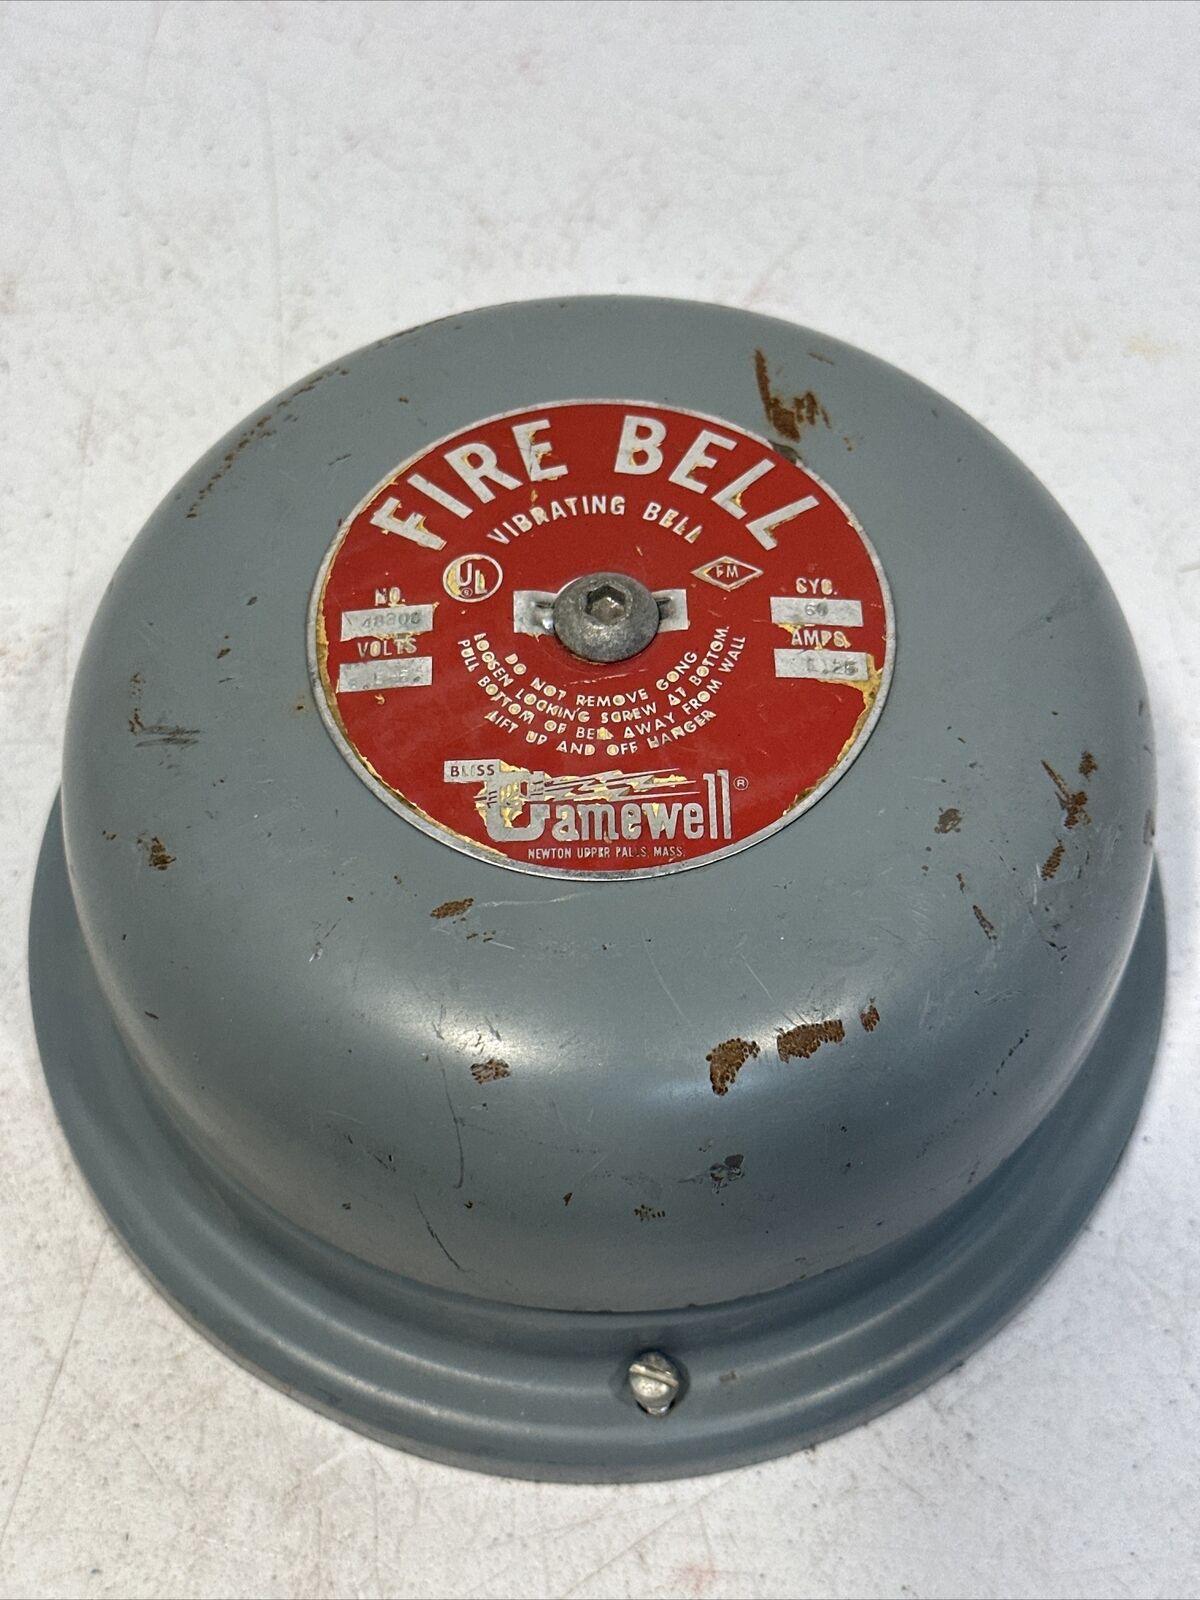 Vintage Gamewell Fire Bell Electric Vibrating Bell No. 48308 6 Volts Working